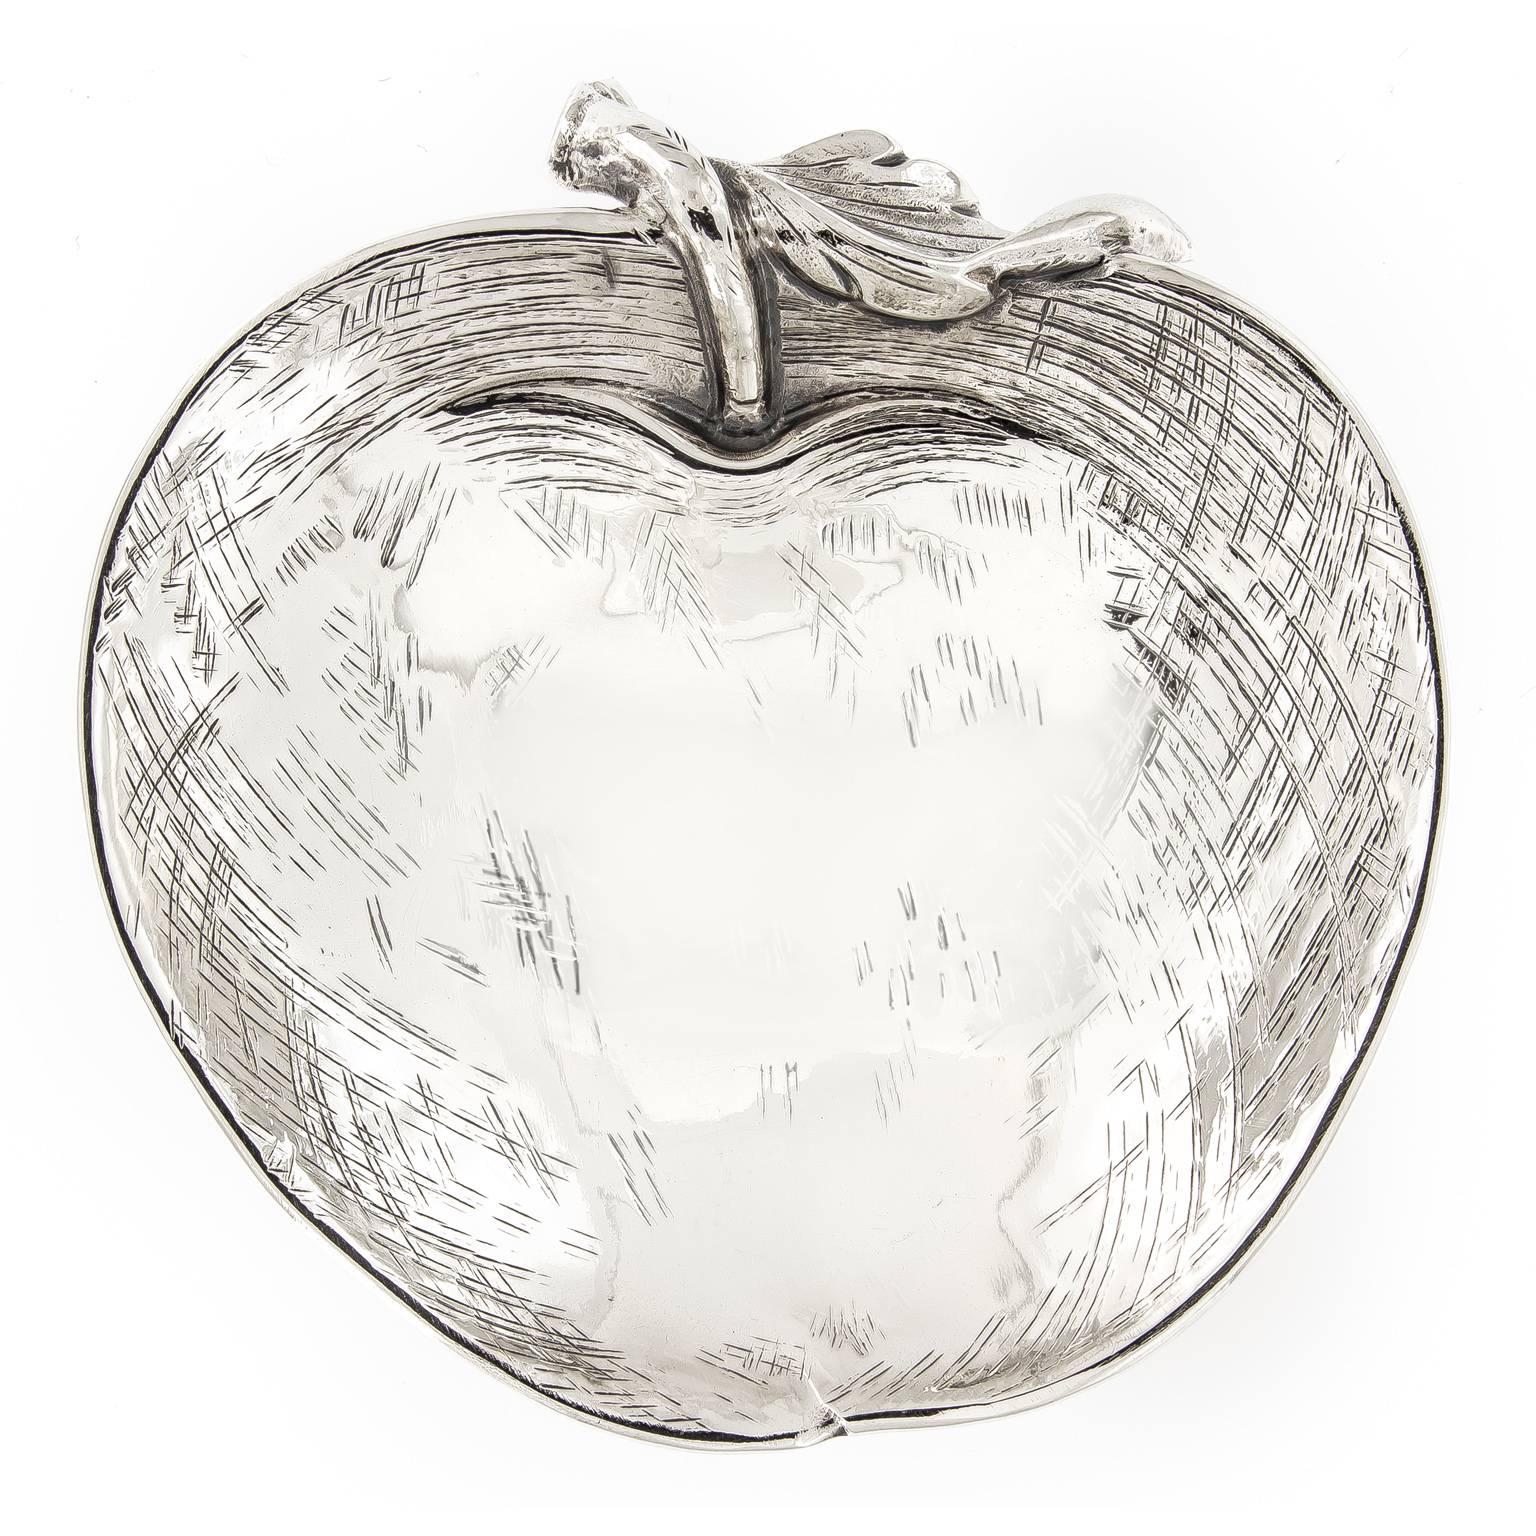 Lovely Apple dish in sterling silver by Buccellati of italy. 3.25 in x 3.25 in.

Marked Buccellati Italy.